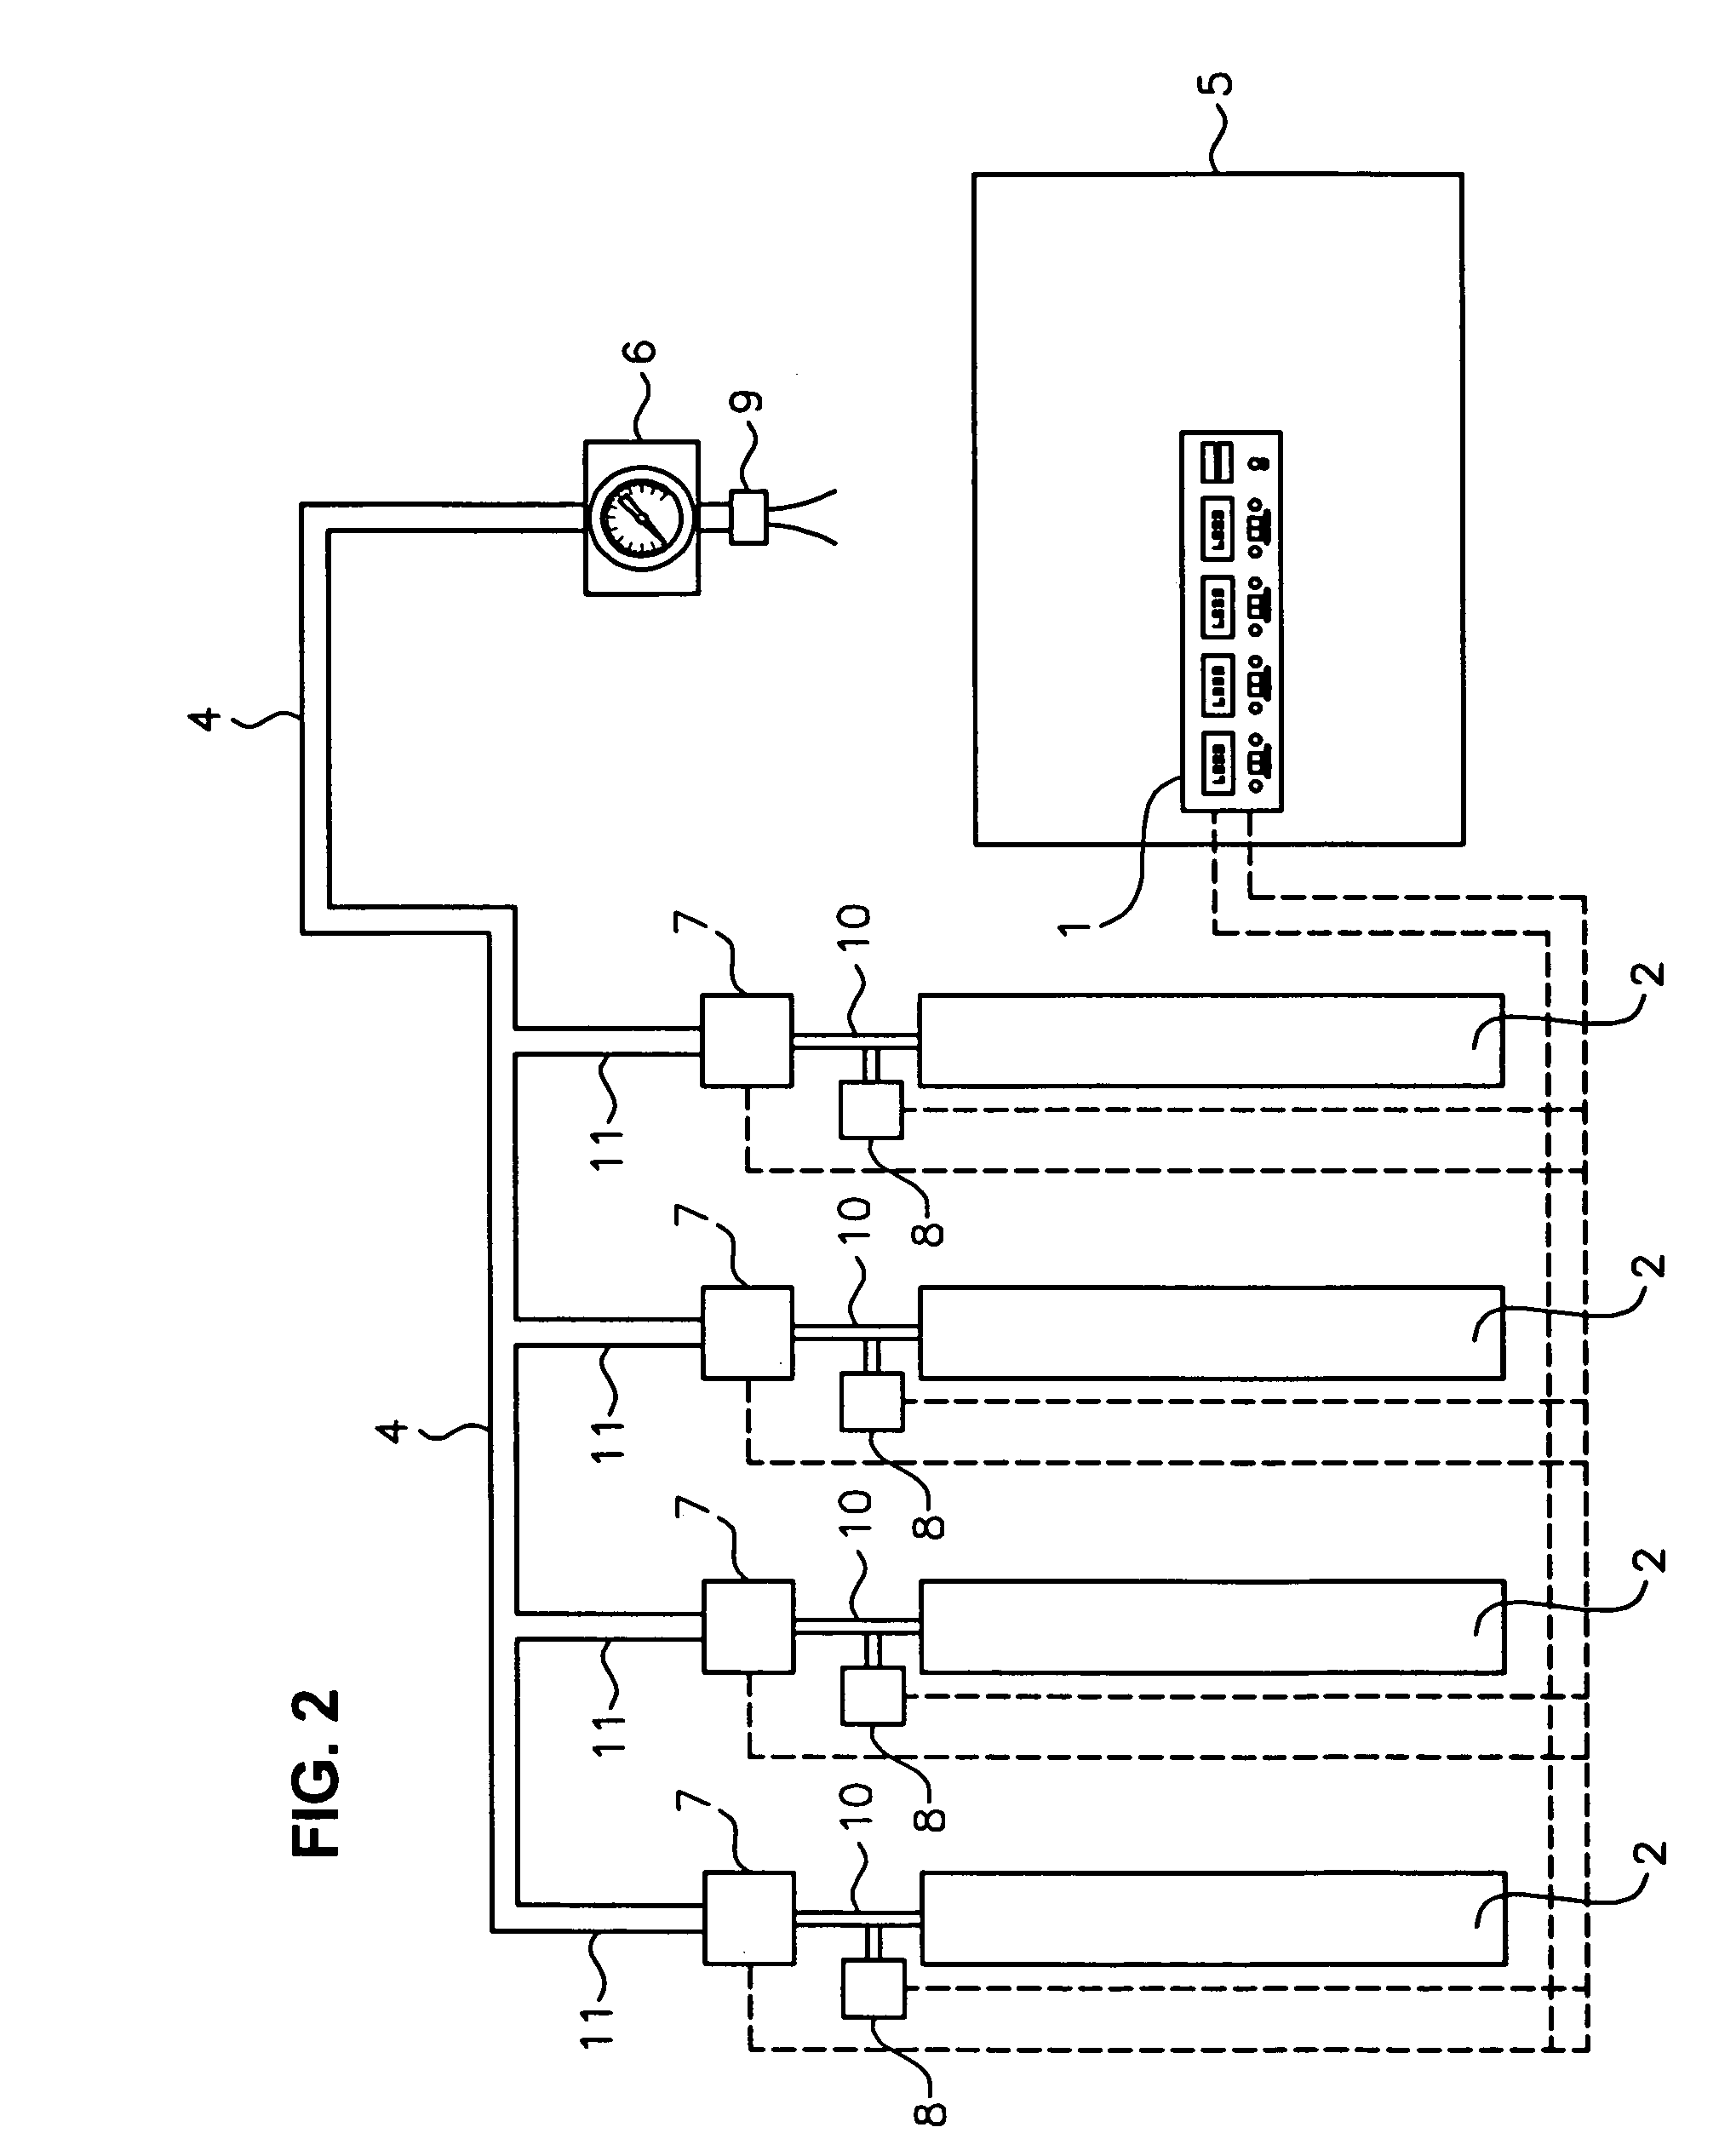 Vehicle mounted compressed air distribution system